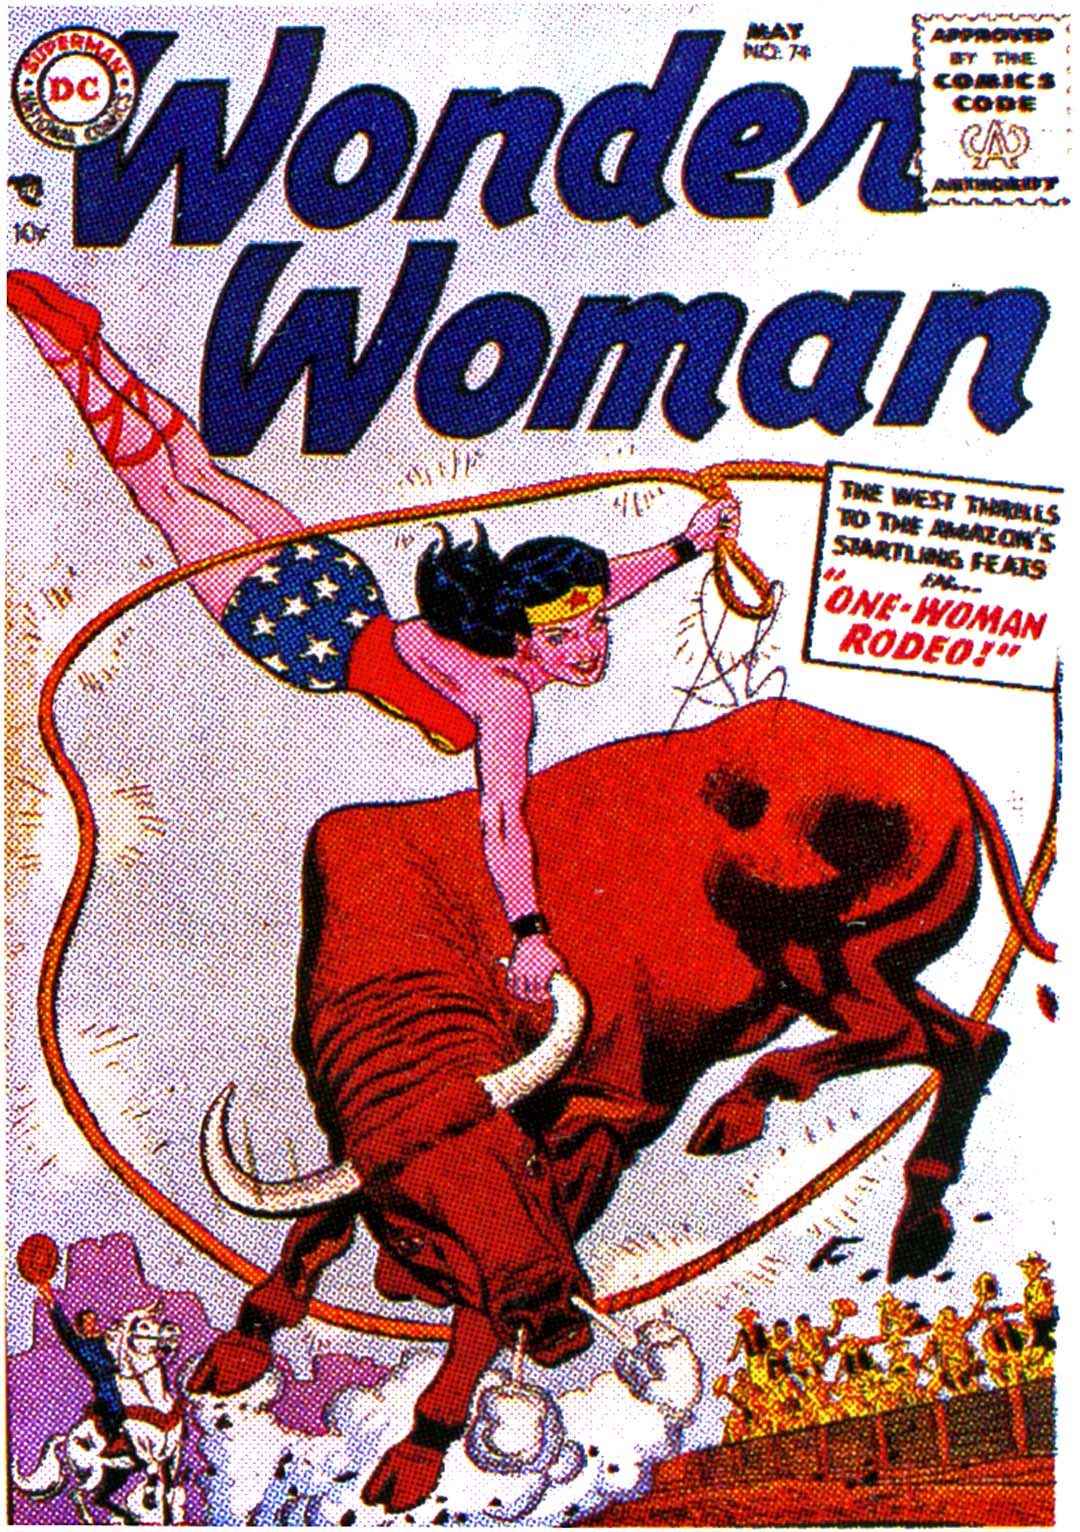 Wonder Woman (1942) issue 74 - Page 1